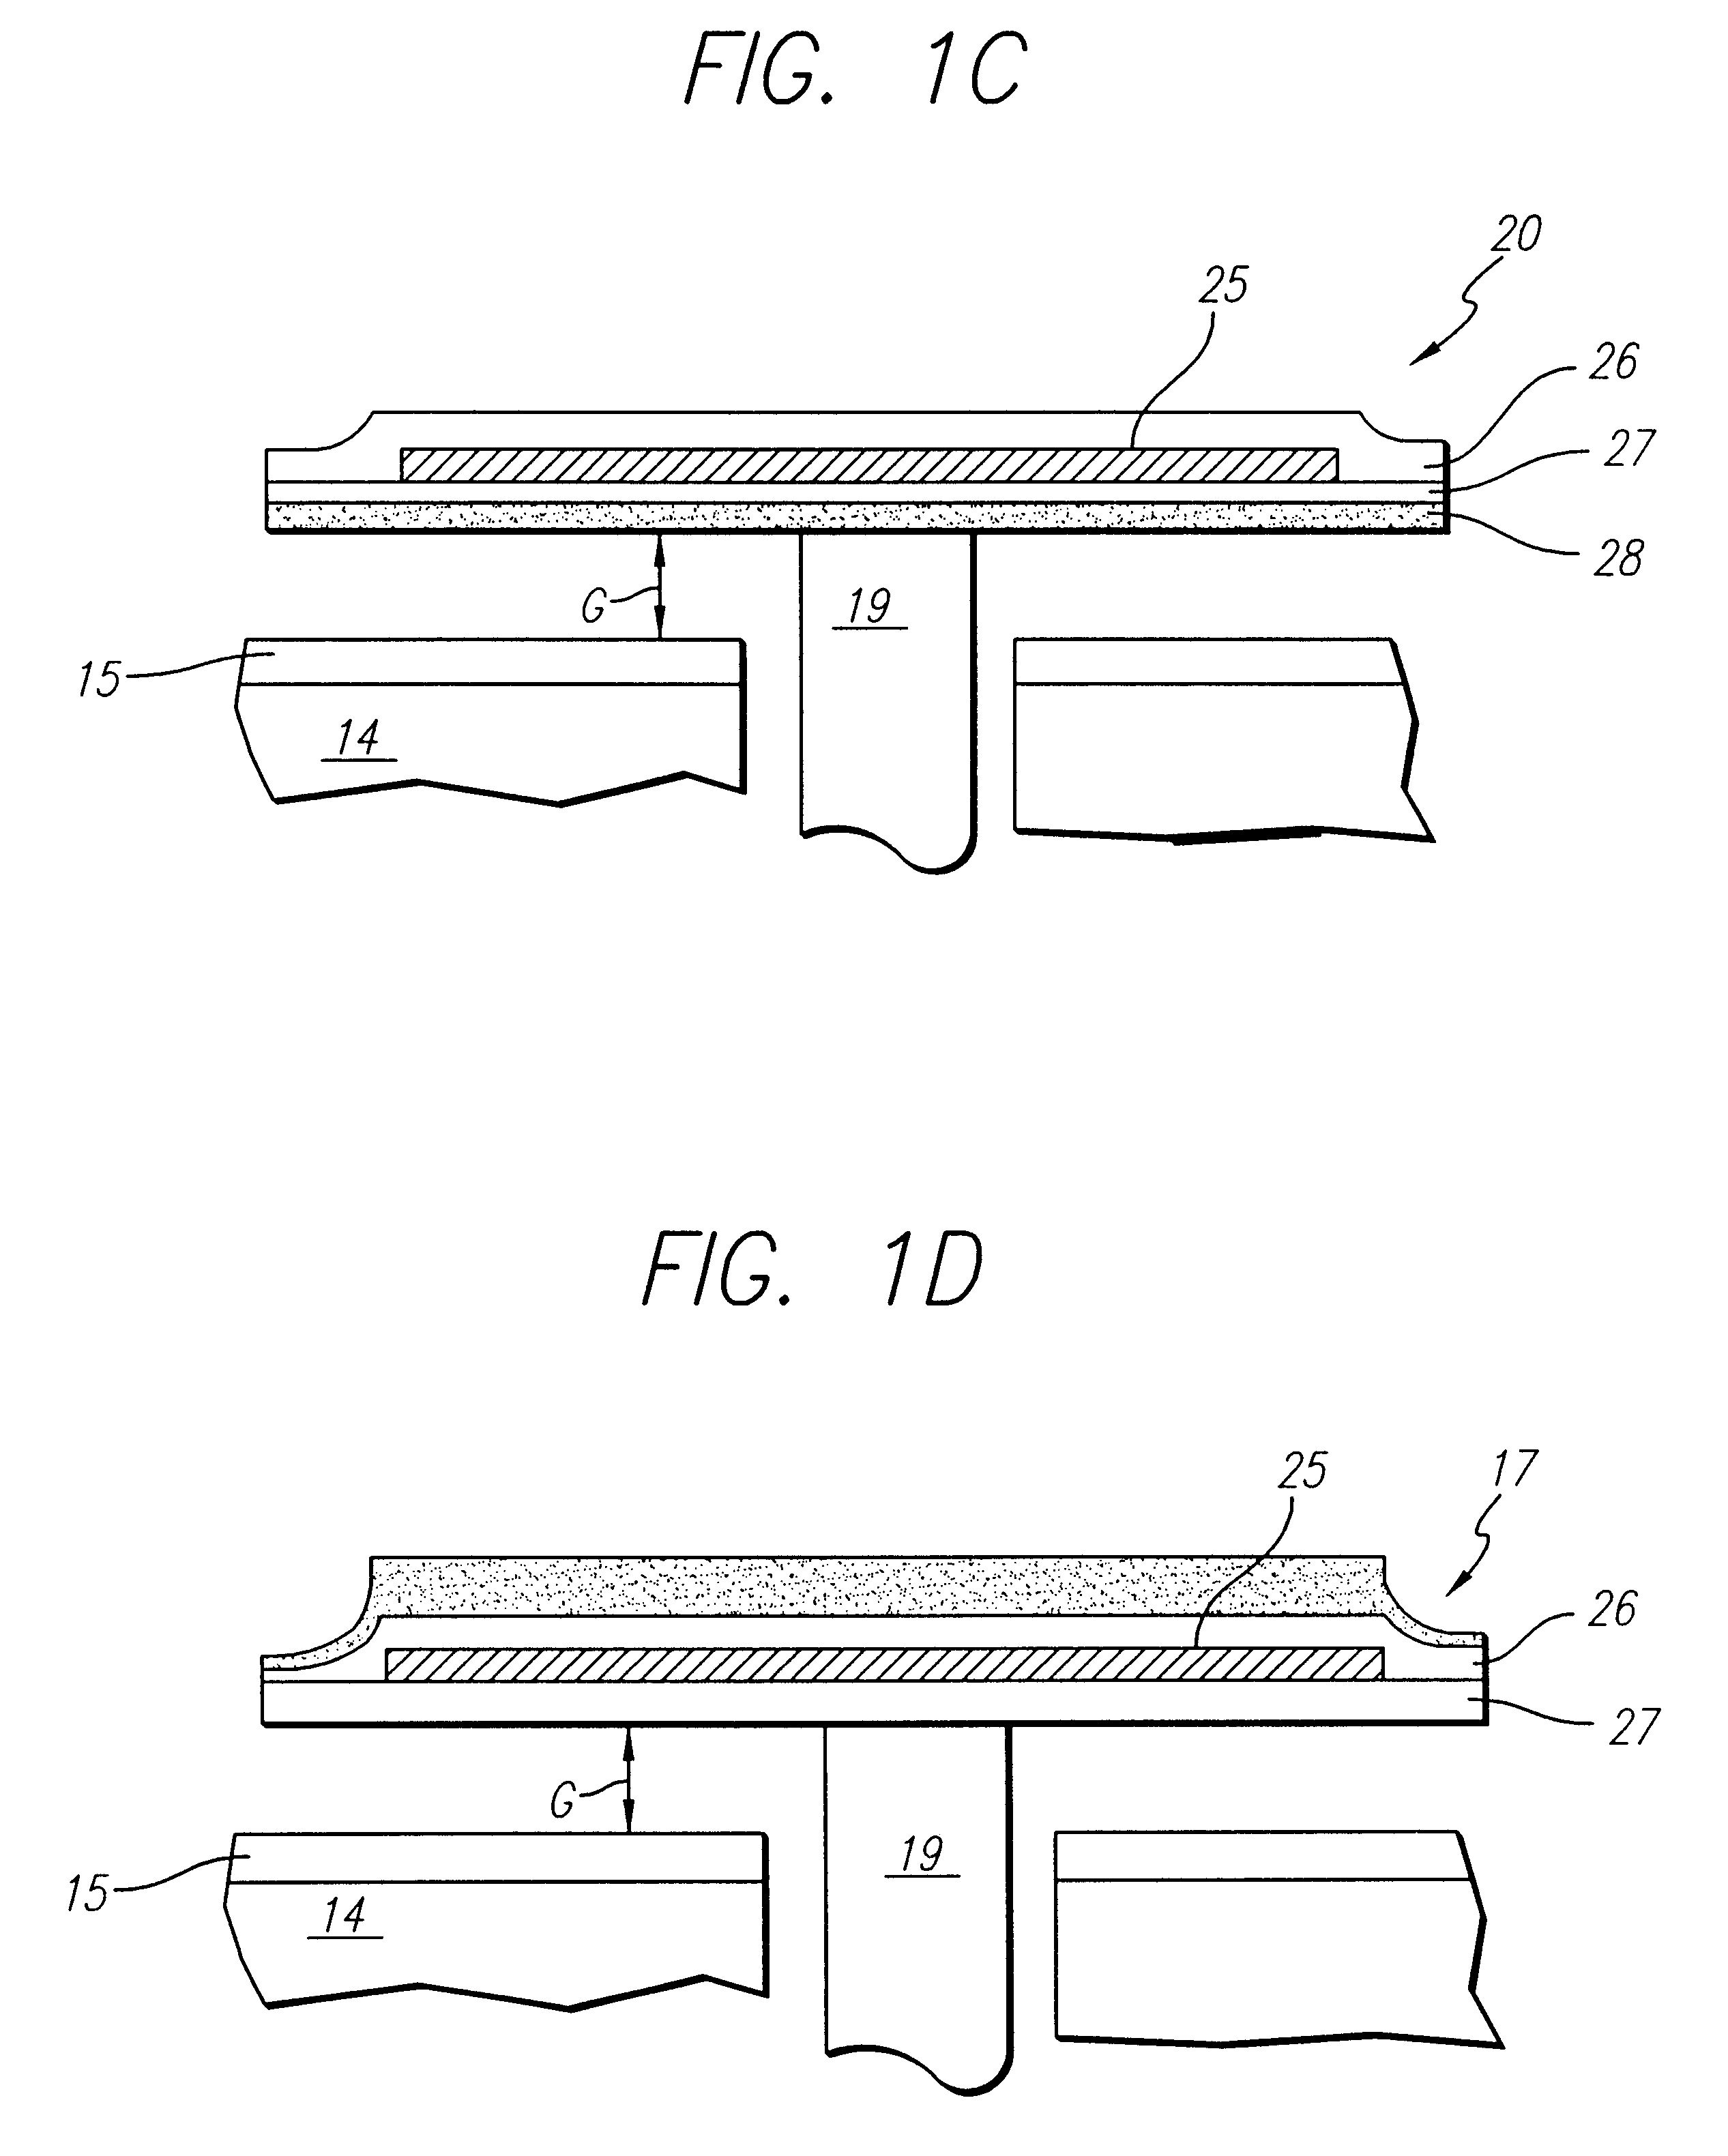 Mm-wave/IR monolithically integrated focal plane array